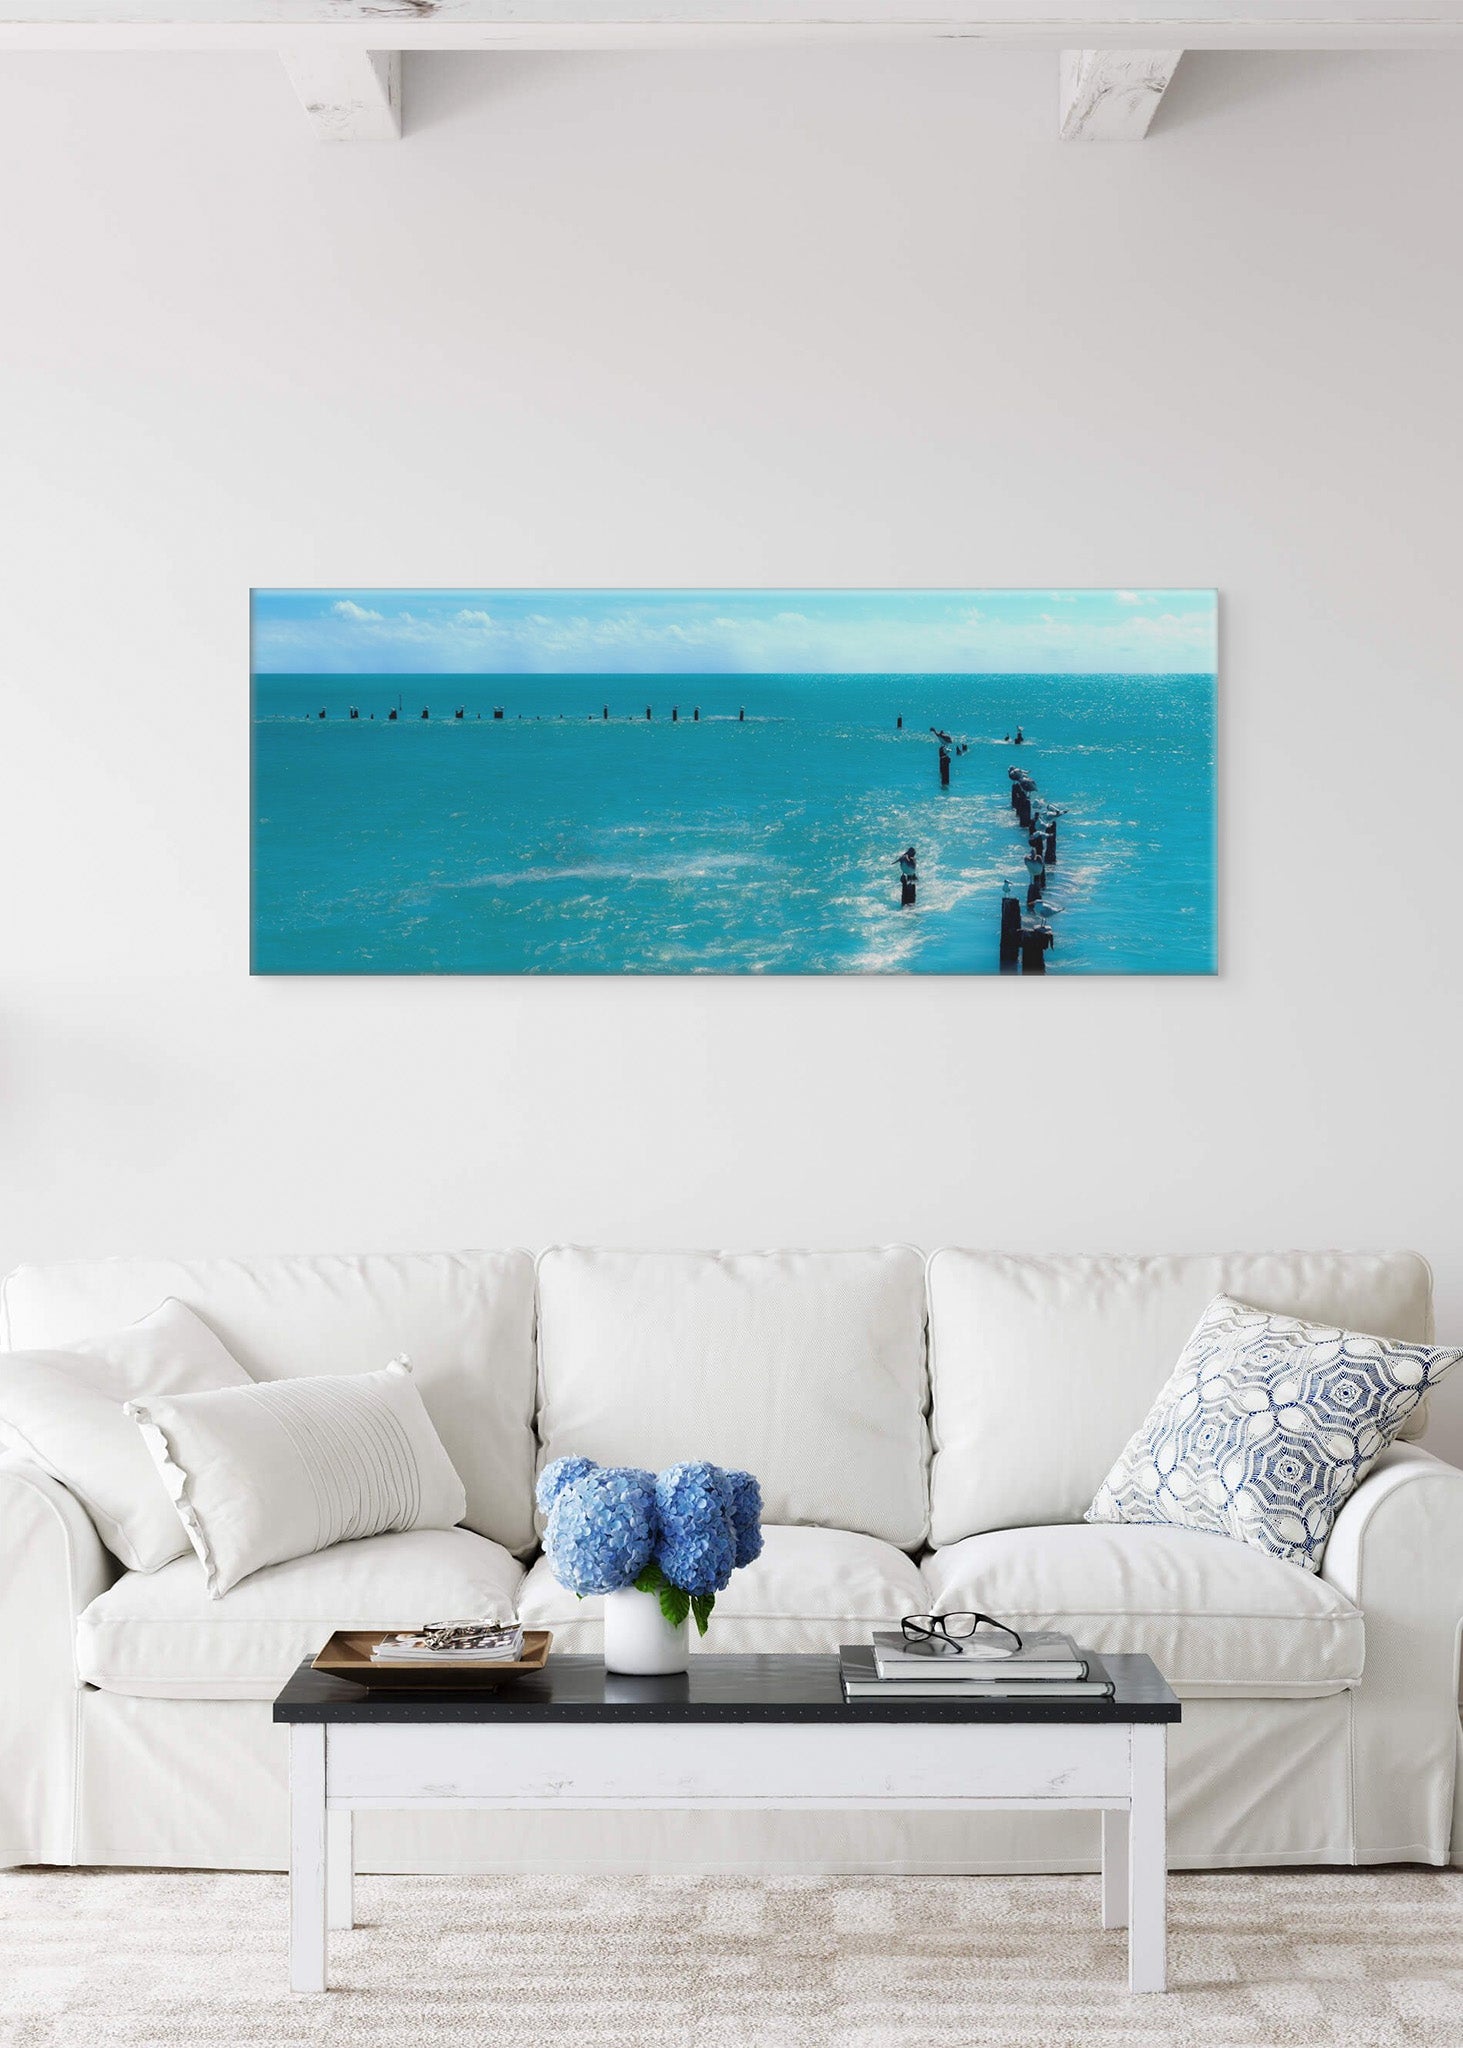 Picture hanging on the wall of a living room. The picture is a fine art landscape photograph titled "Island Time" by Cameron Dreaux of Dreaux Fine Art.